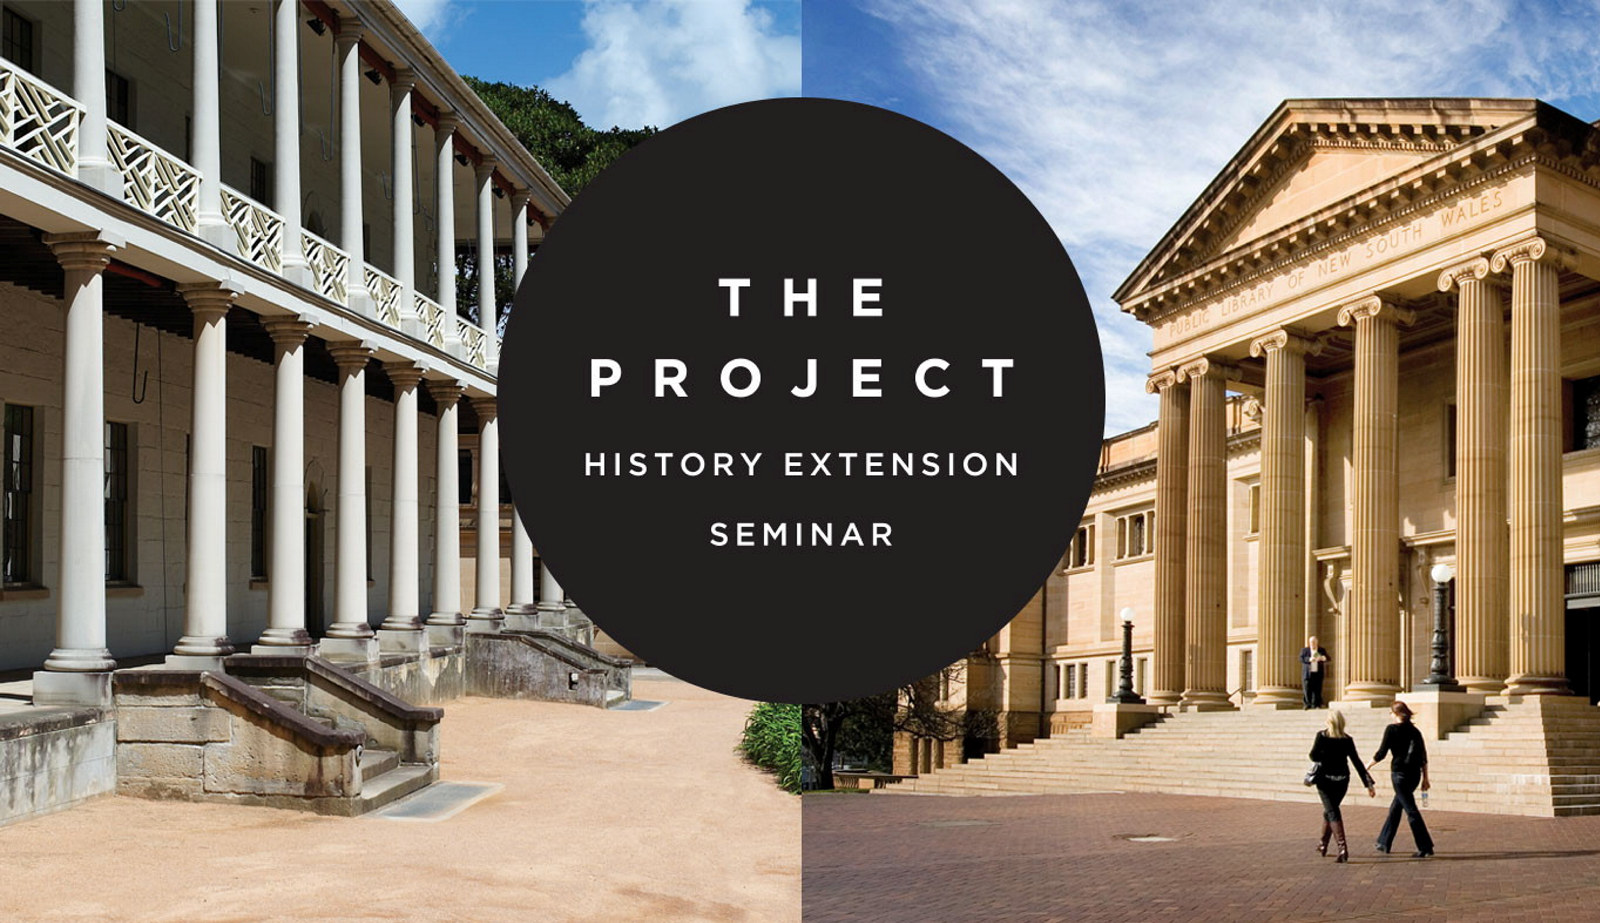 The Project History Extension Seminar